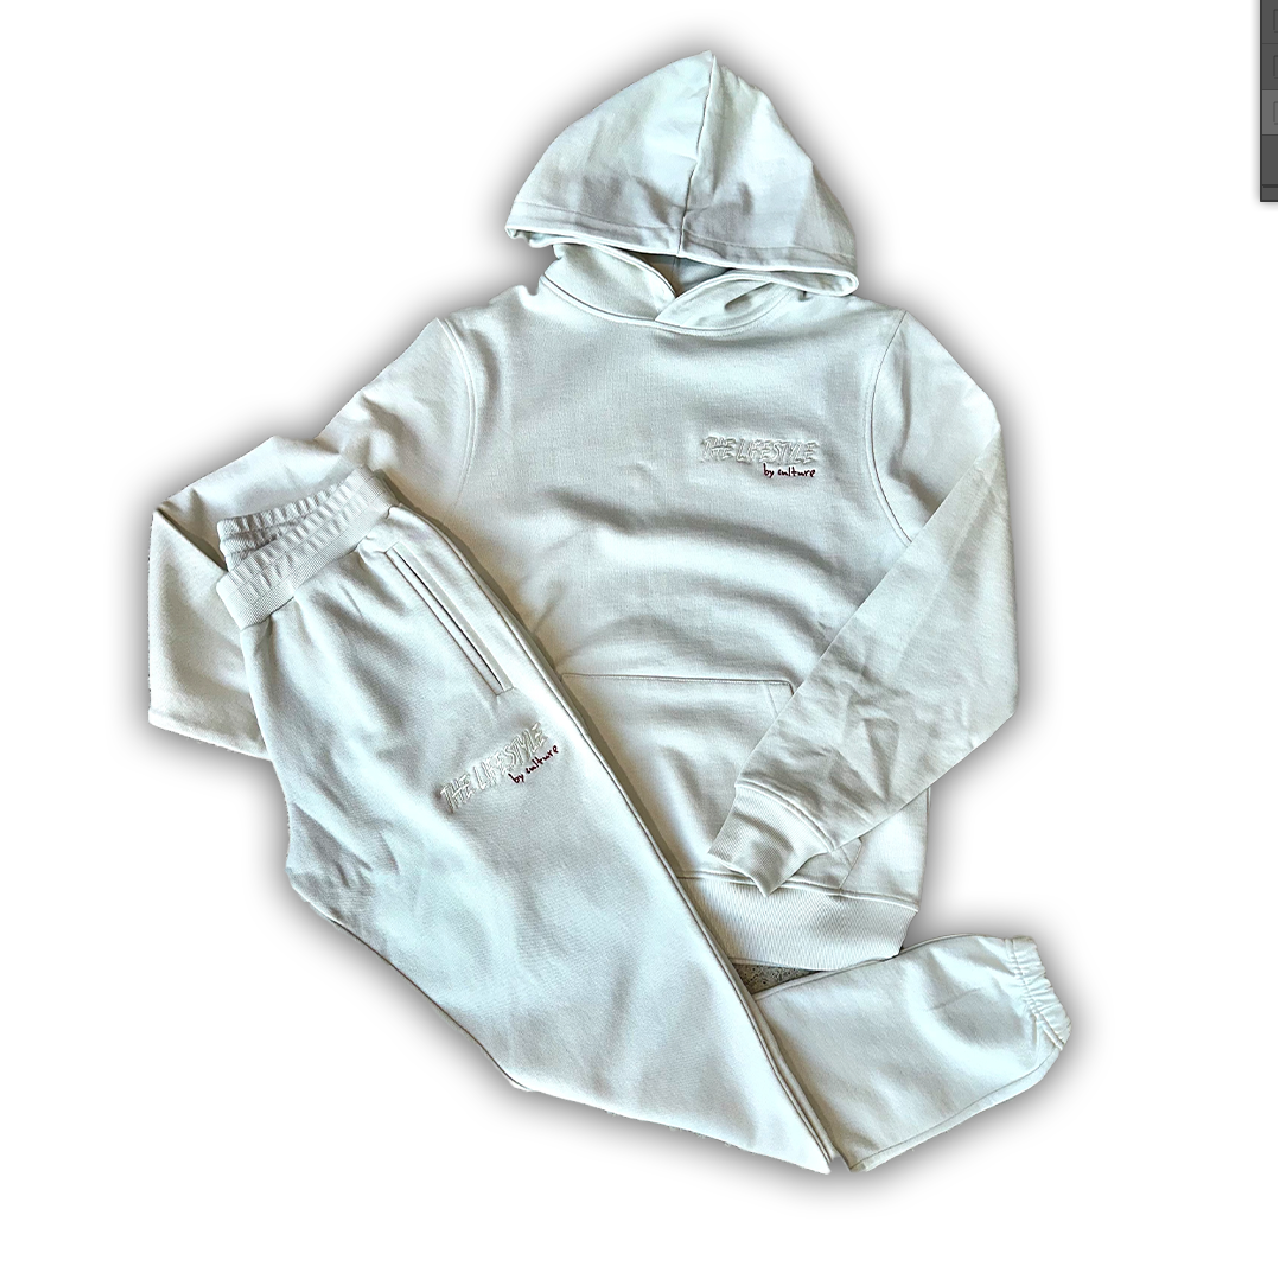 Lifestyle by Culture Sweatsuits